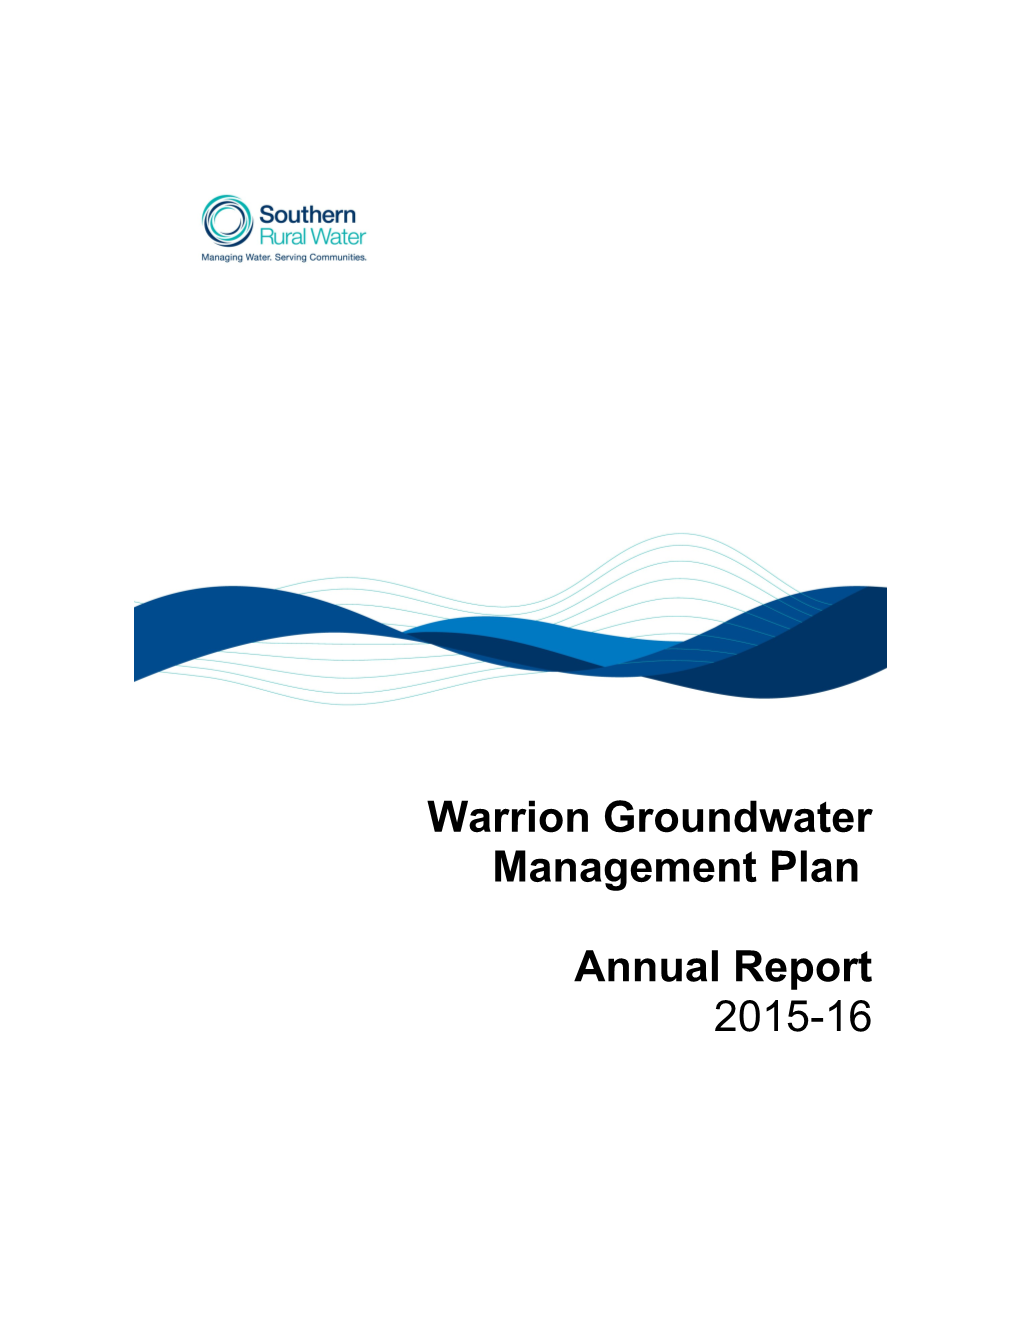 Warrion Groundwater Management Plan Annual Report 2015-16